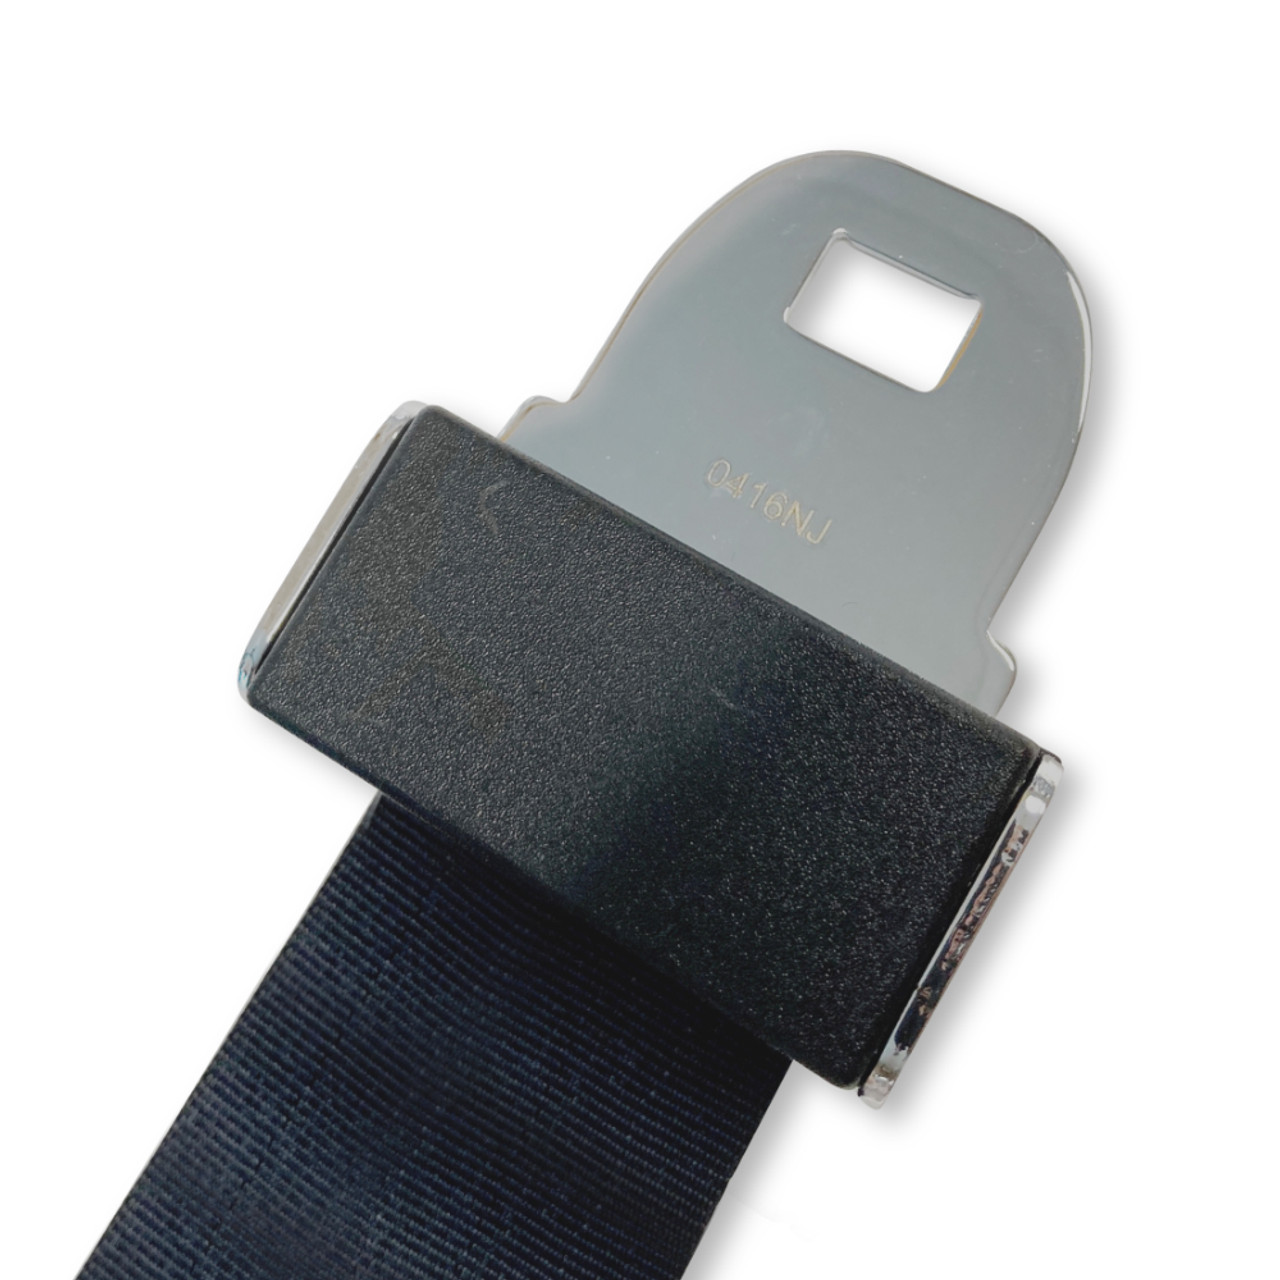 COVER, Seat Belt Buckle, Covers the tongue of the belt, Black